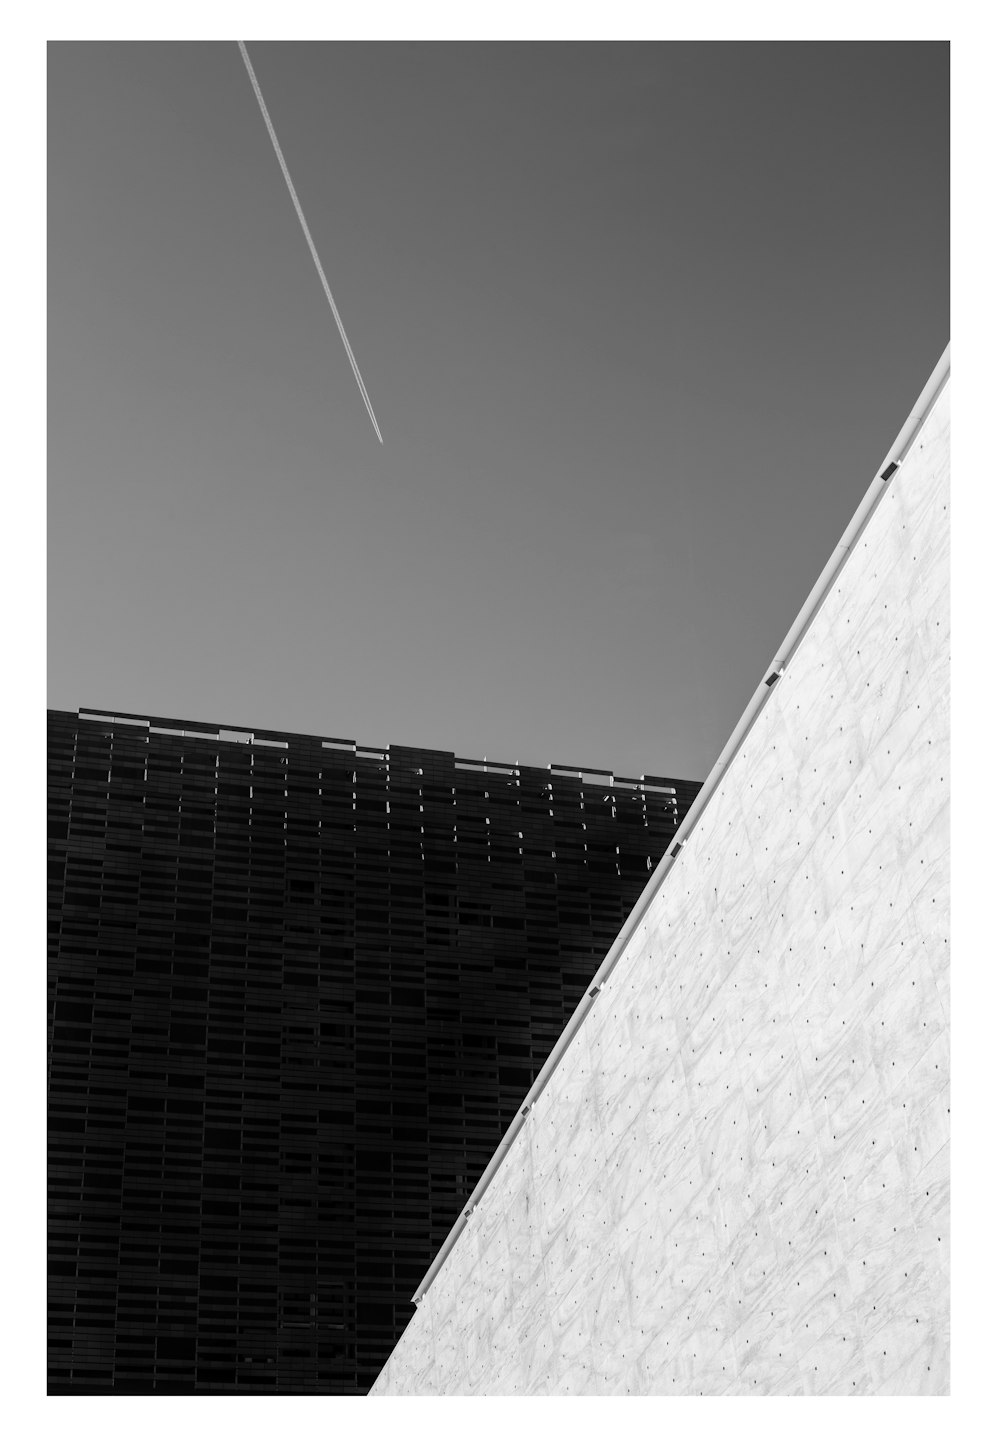 a black and white photo of an airplane in the sky